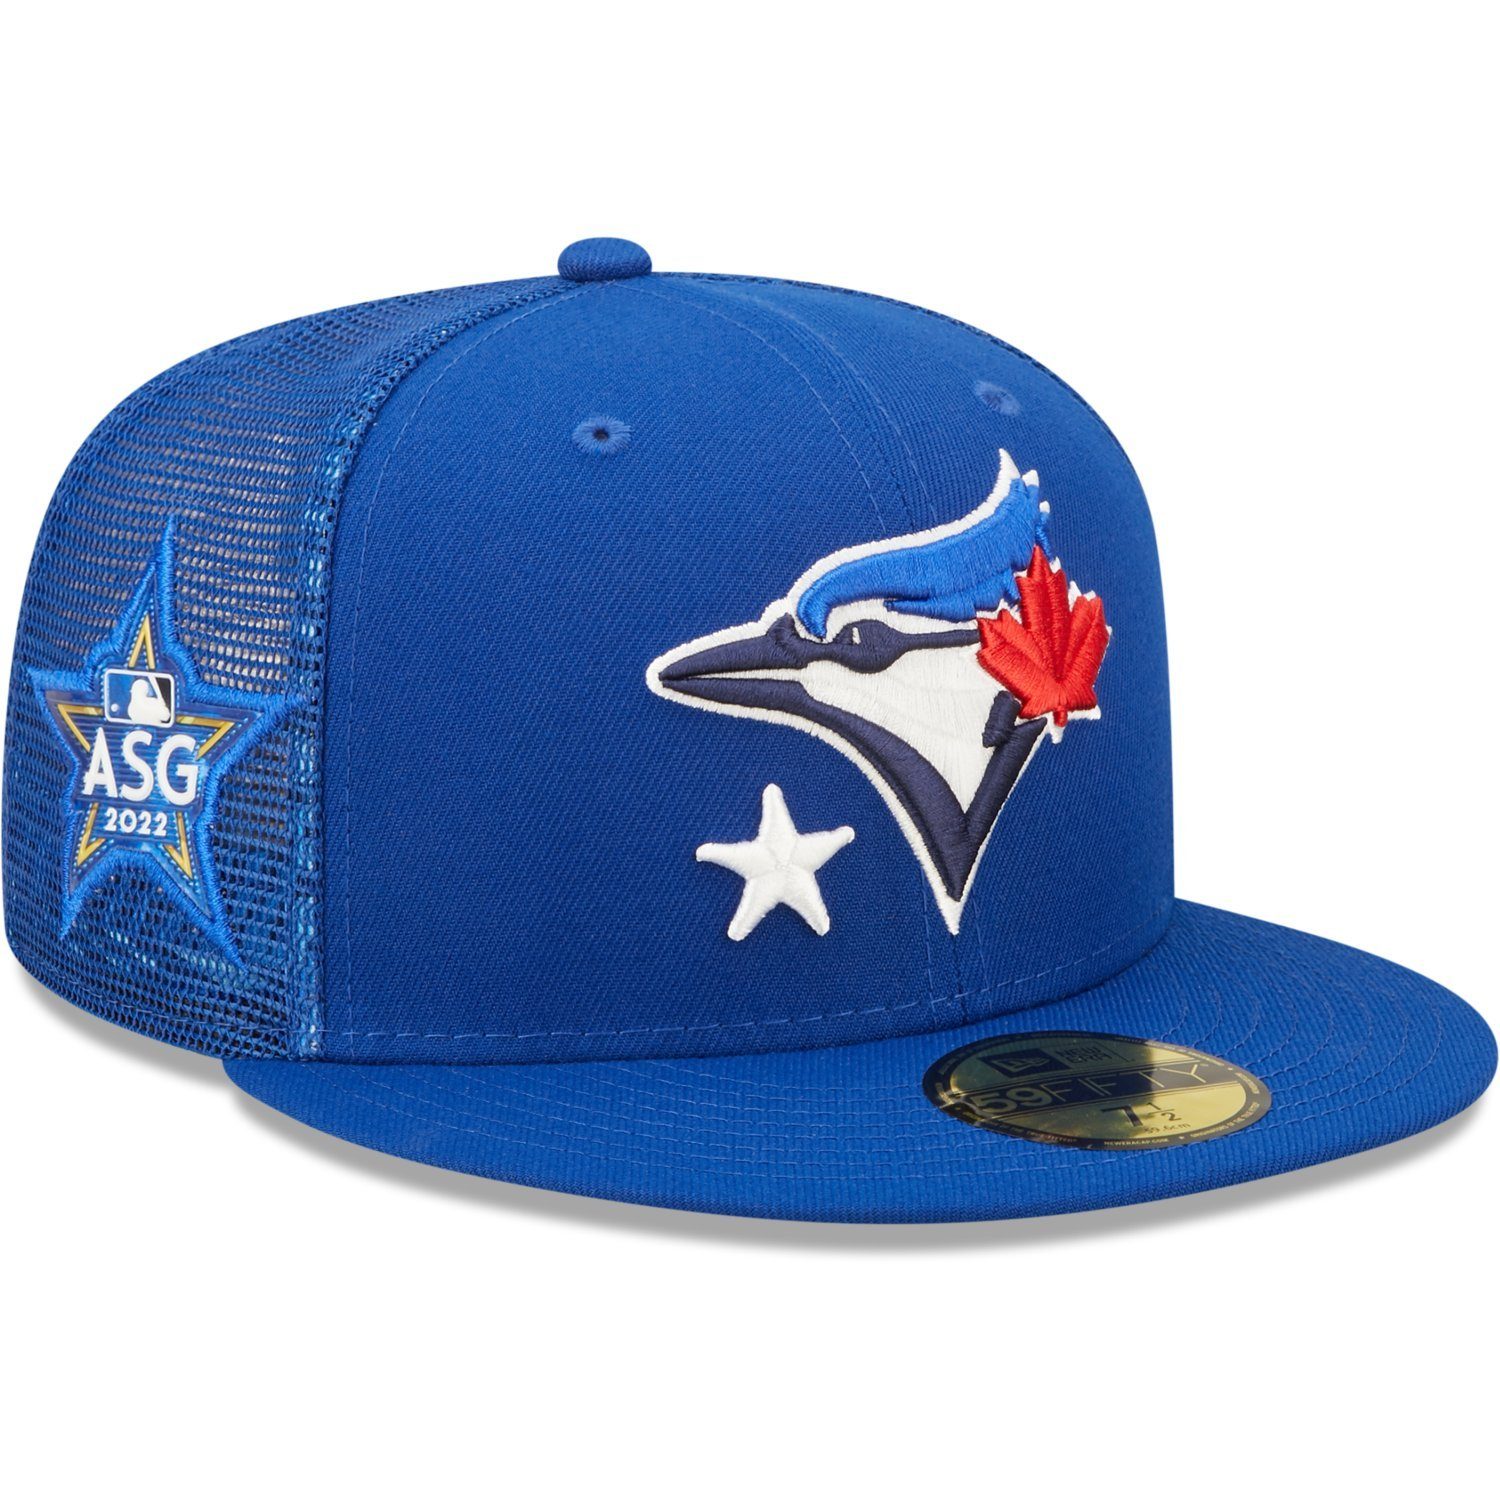 New Era Fitted ALLSTAR GAME 59Fifty Cap Toronto Jays